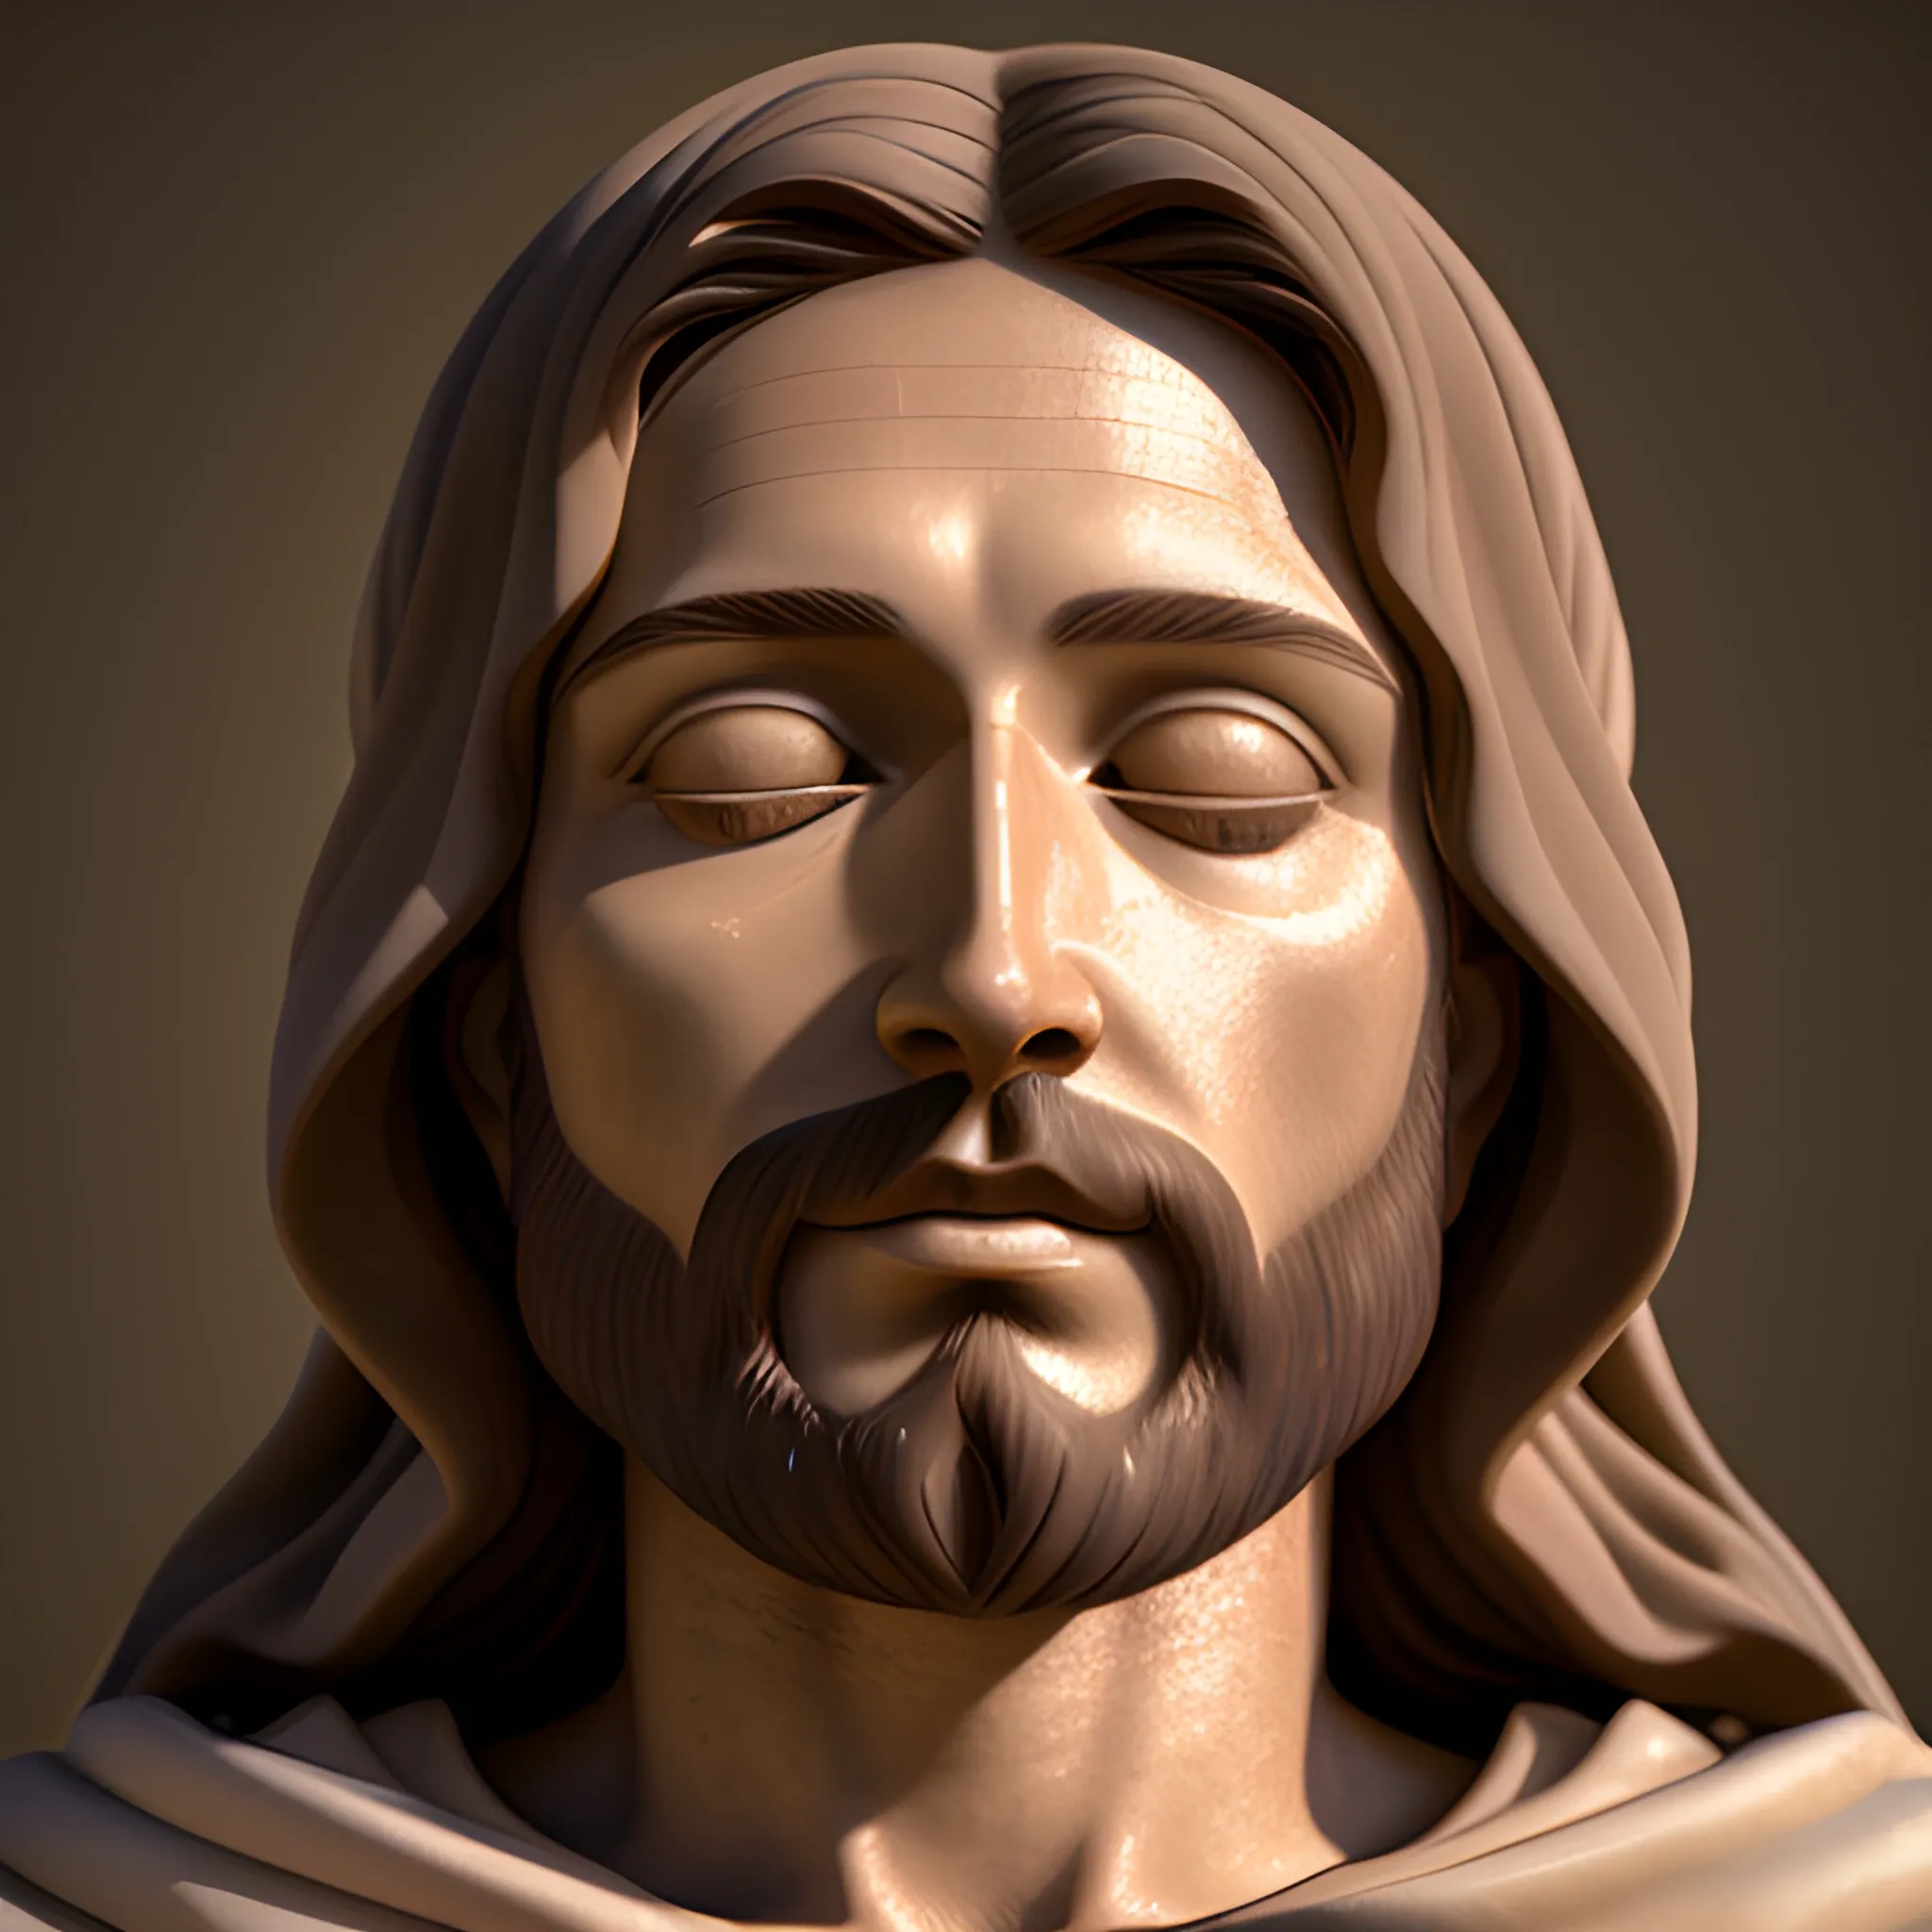 serene jesus christ sitting hearing another person, realistic, 4k, bright light face, open eyes, 3D, portraite, whole body 